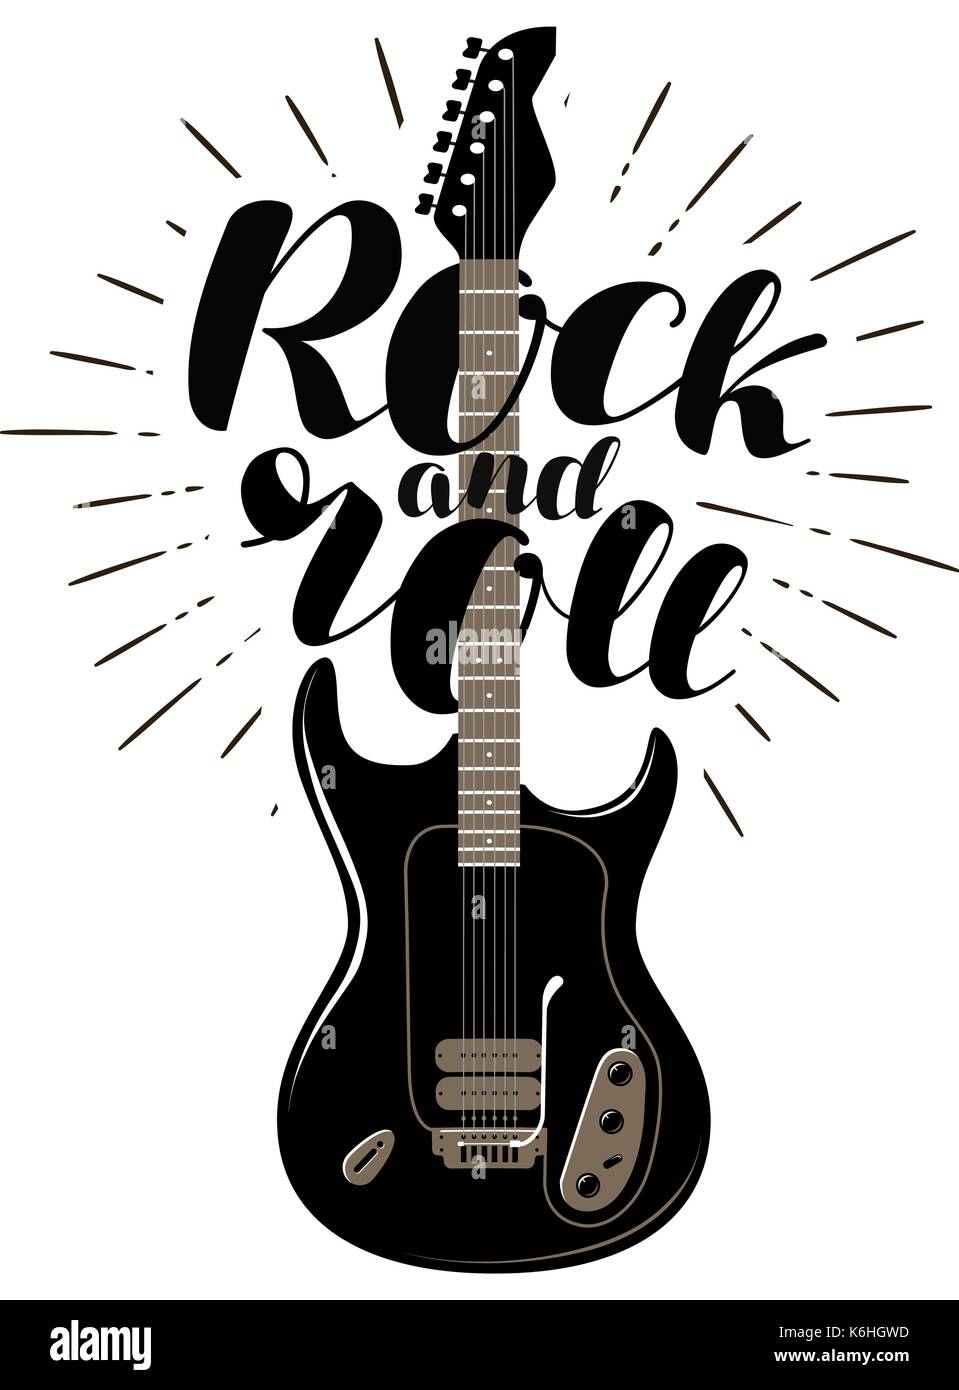 Vector Flat Pixel Rock N Roll Icon with Fire' Poster - rock n roll